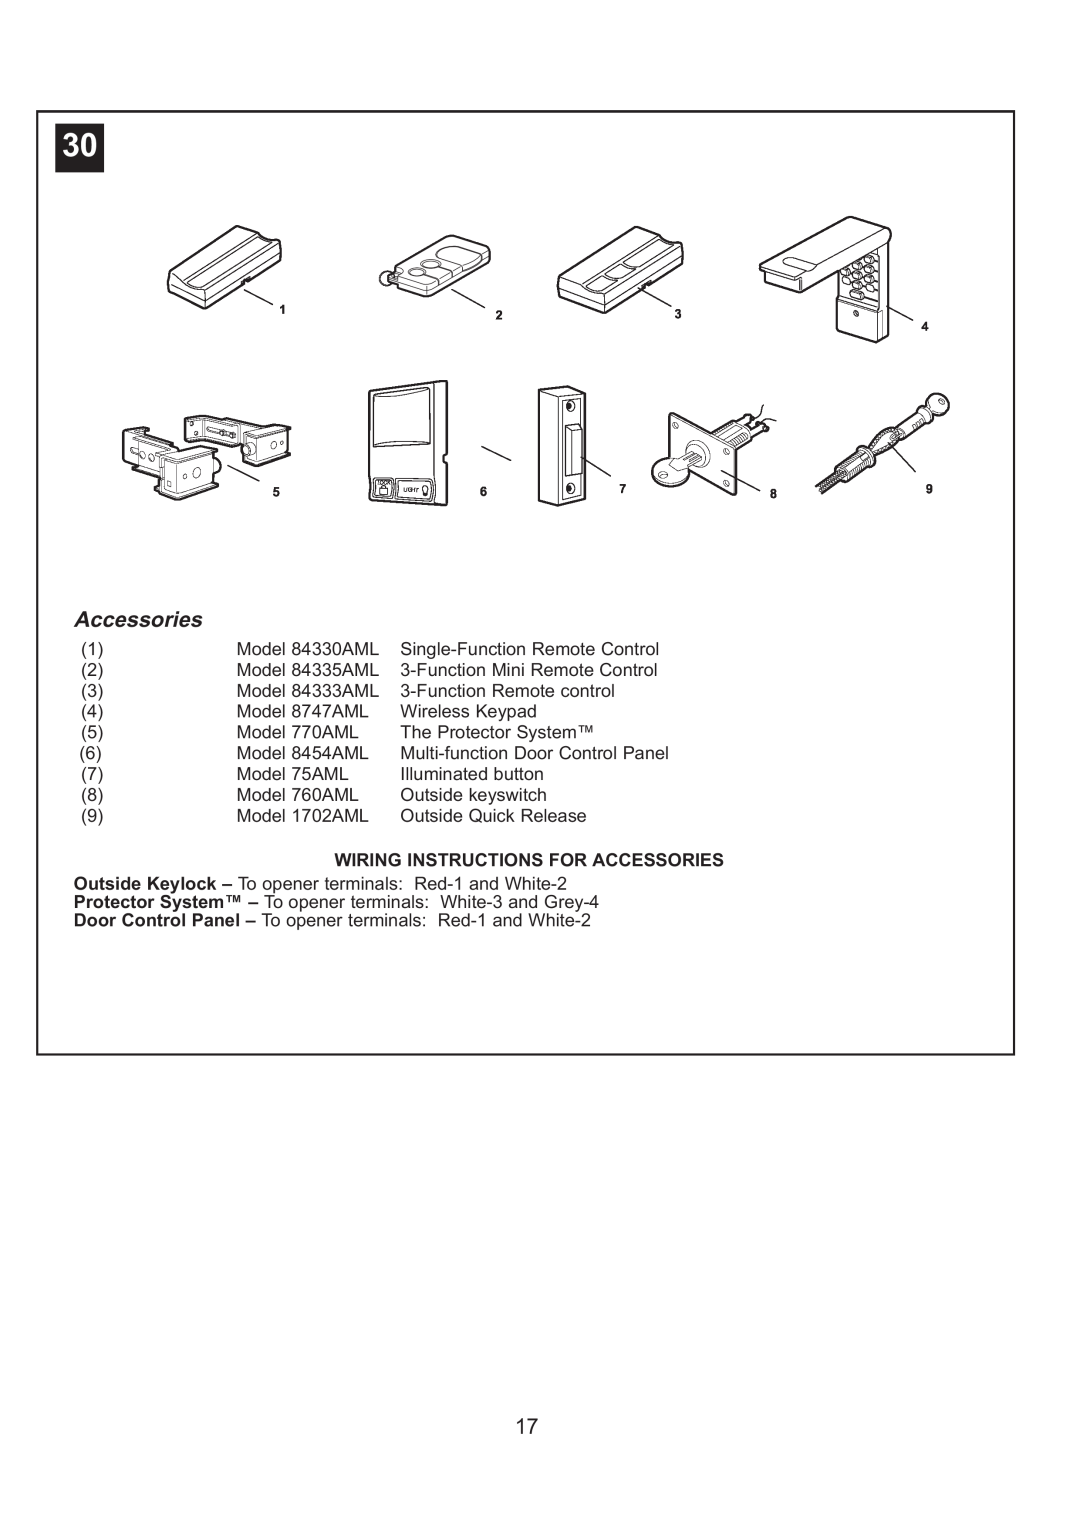 Sigma ML750 instruction manual Wiring Instructions For Accessories 